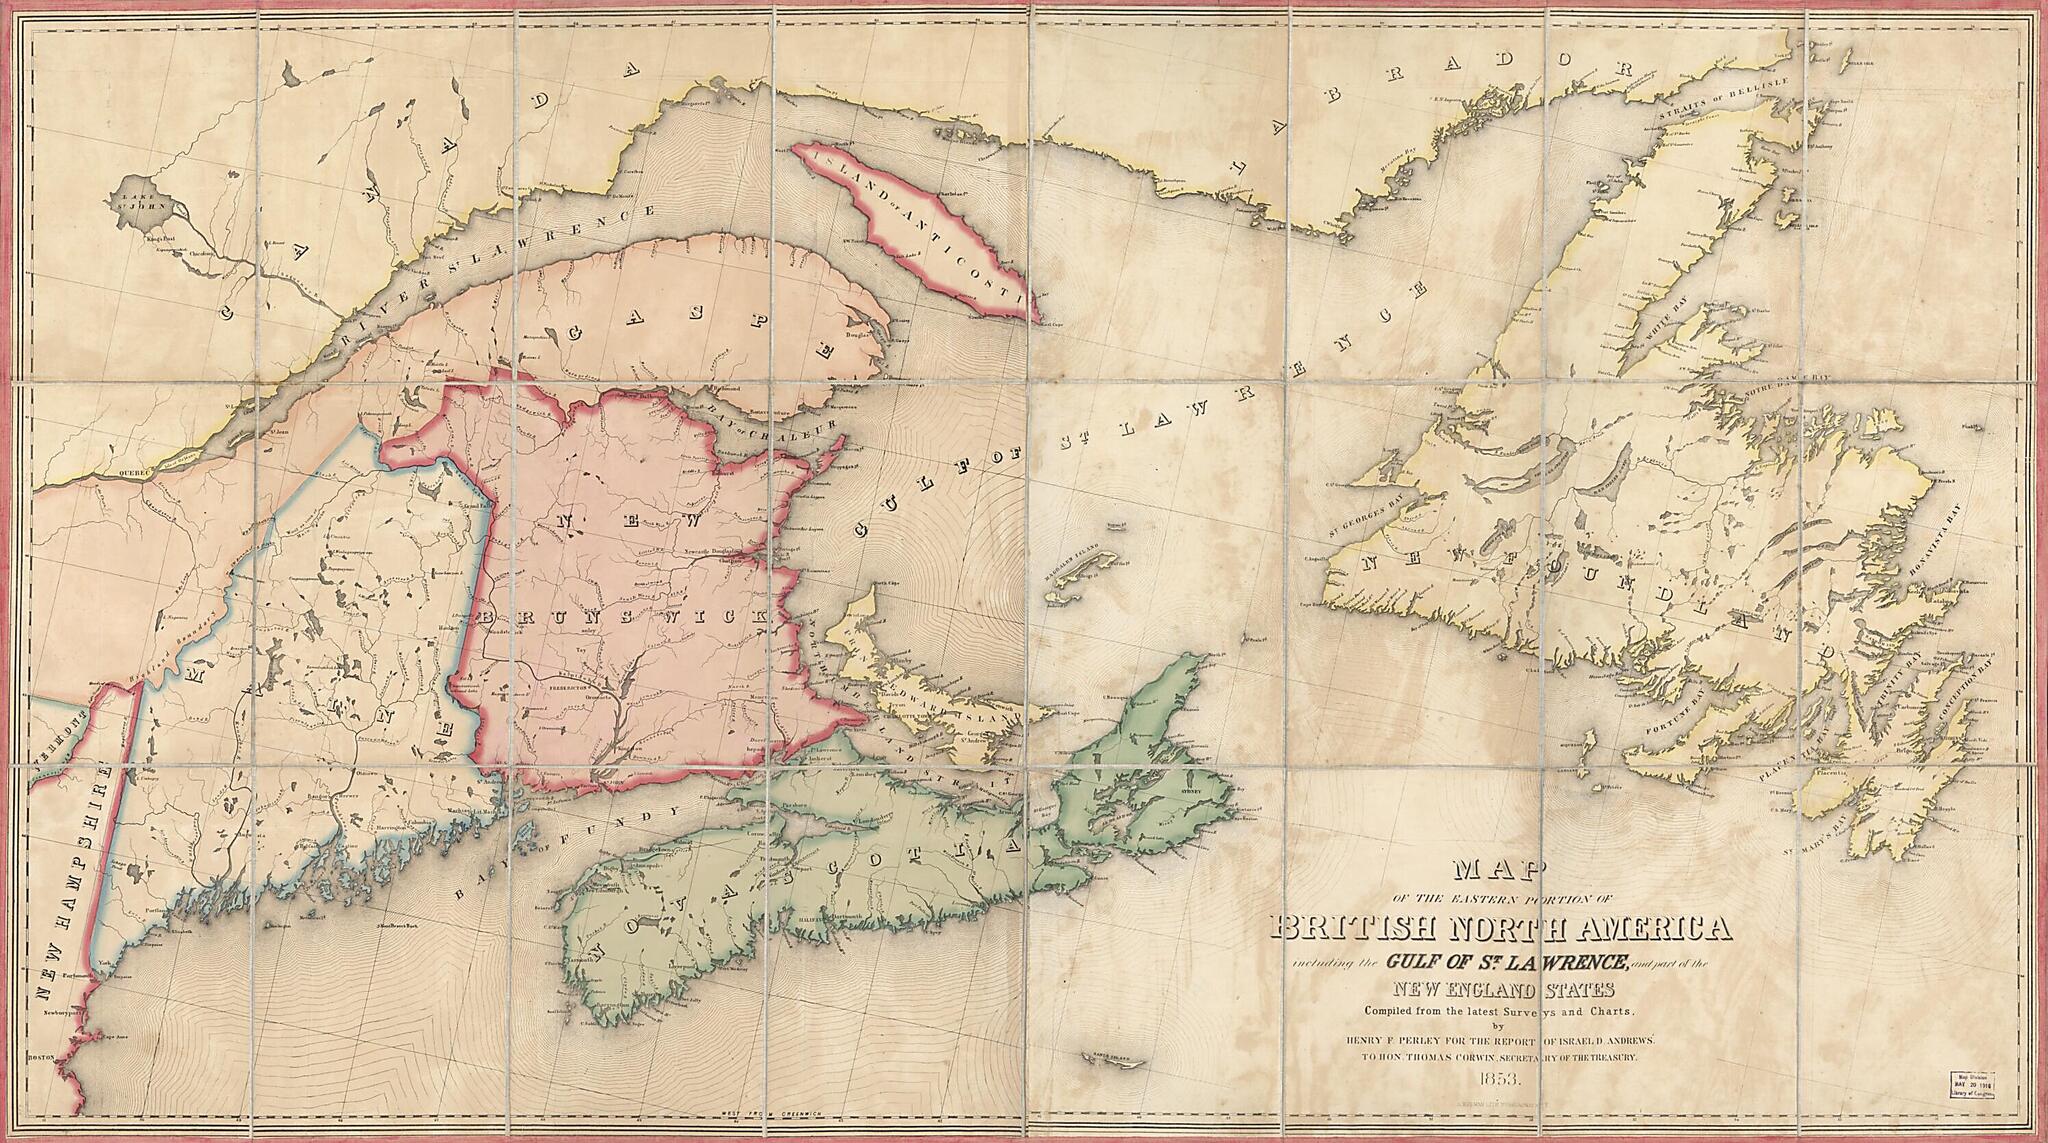 This old map of Map of the Eastern Portion of British North America : Including the Gulf of St. Lawrence, and Part of the New England States from 1853 was created by Henry F. Perley in 1853